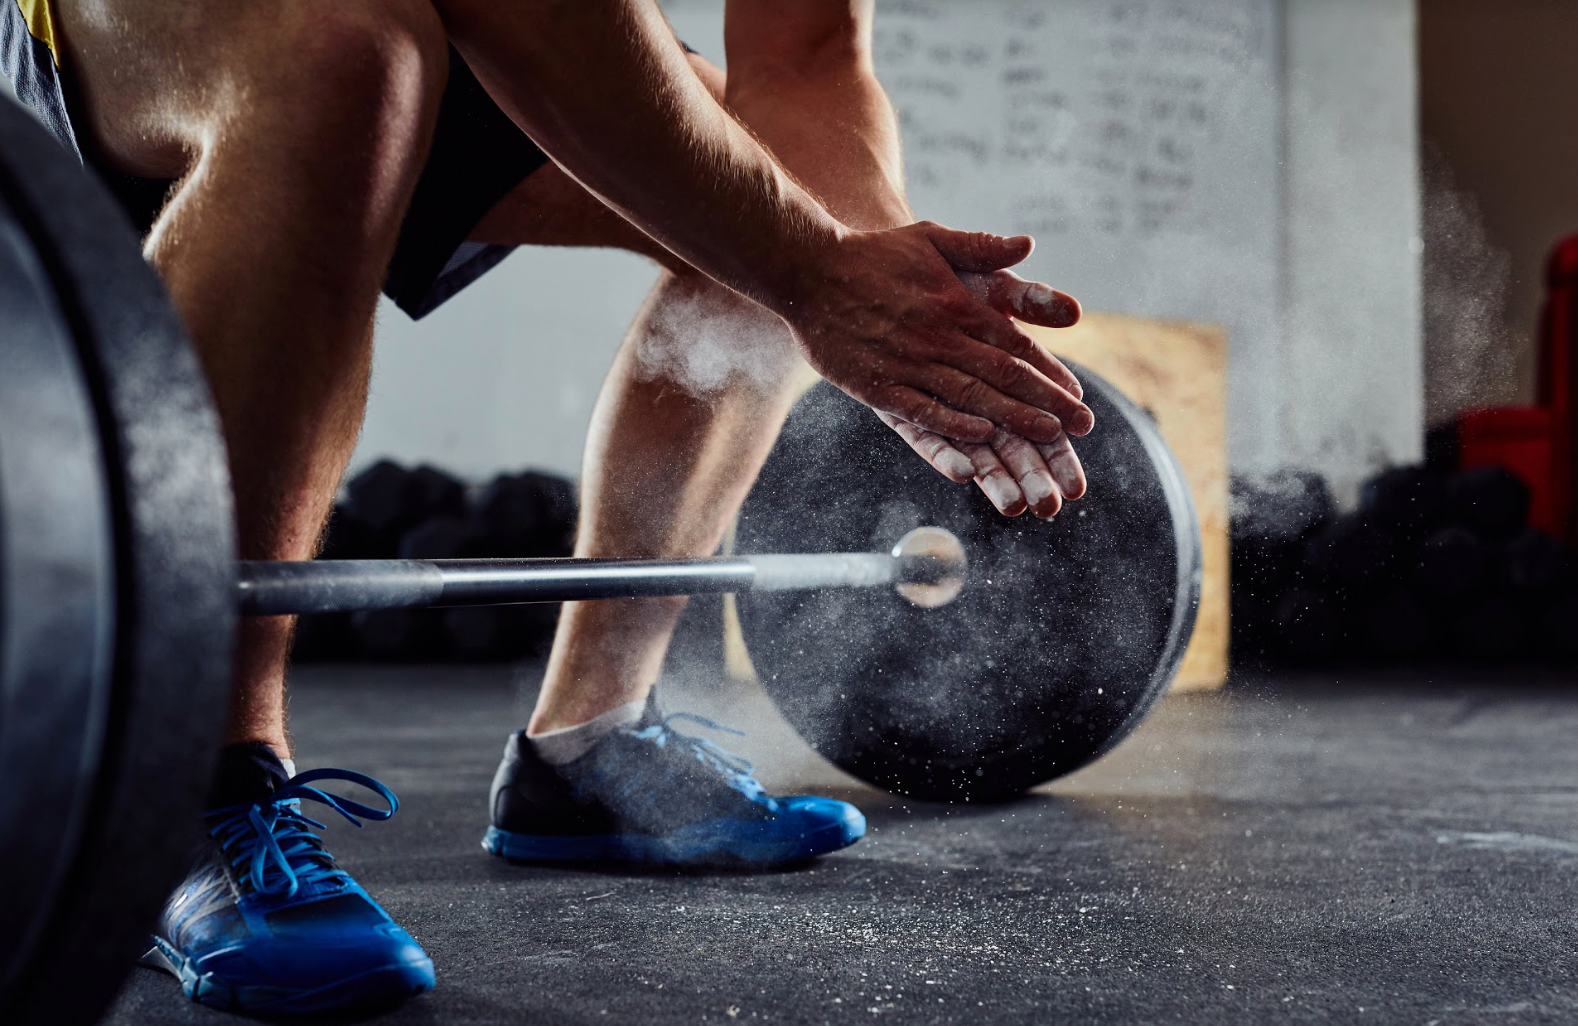 Infographic - 'A 'non-crossfitters' Guide to Crossfit'